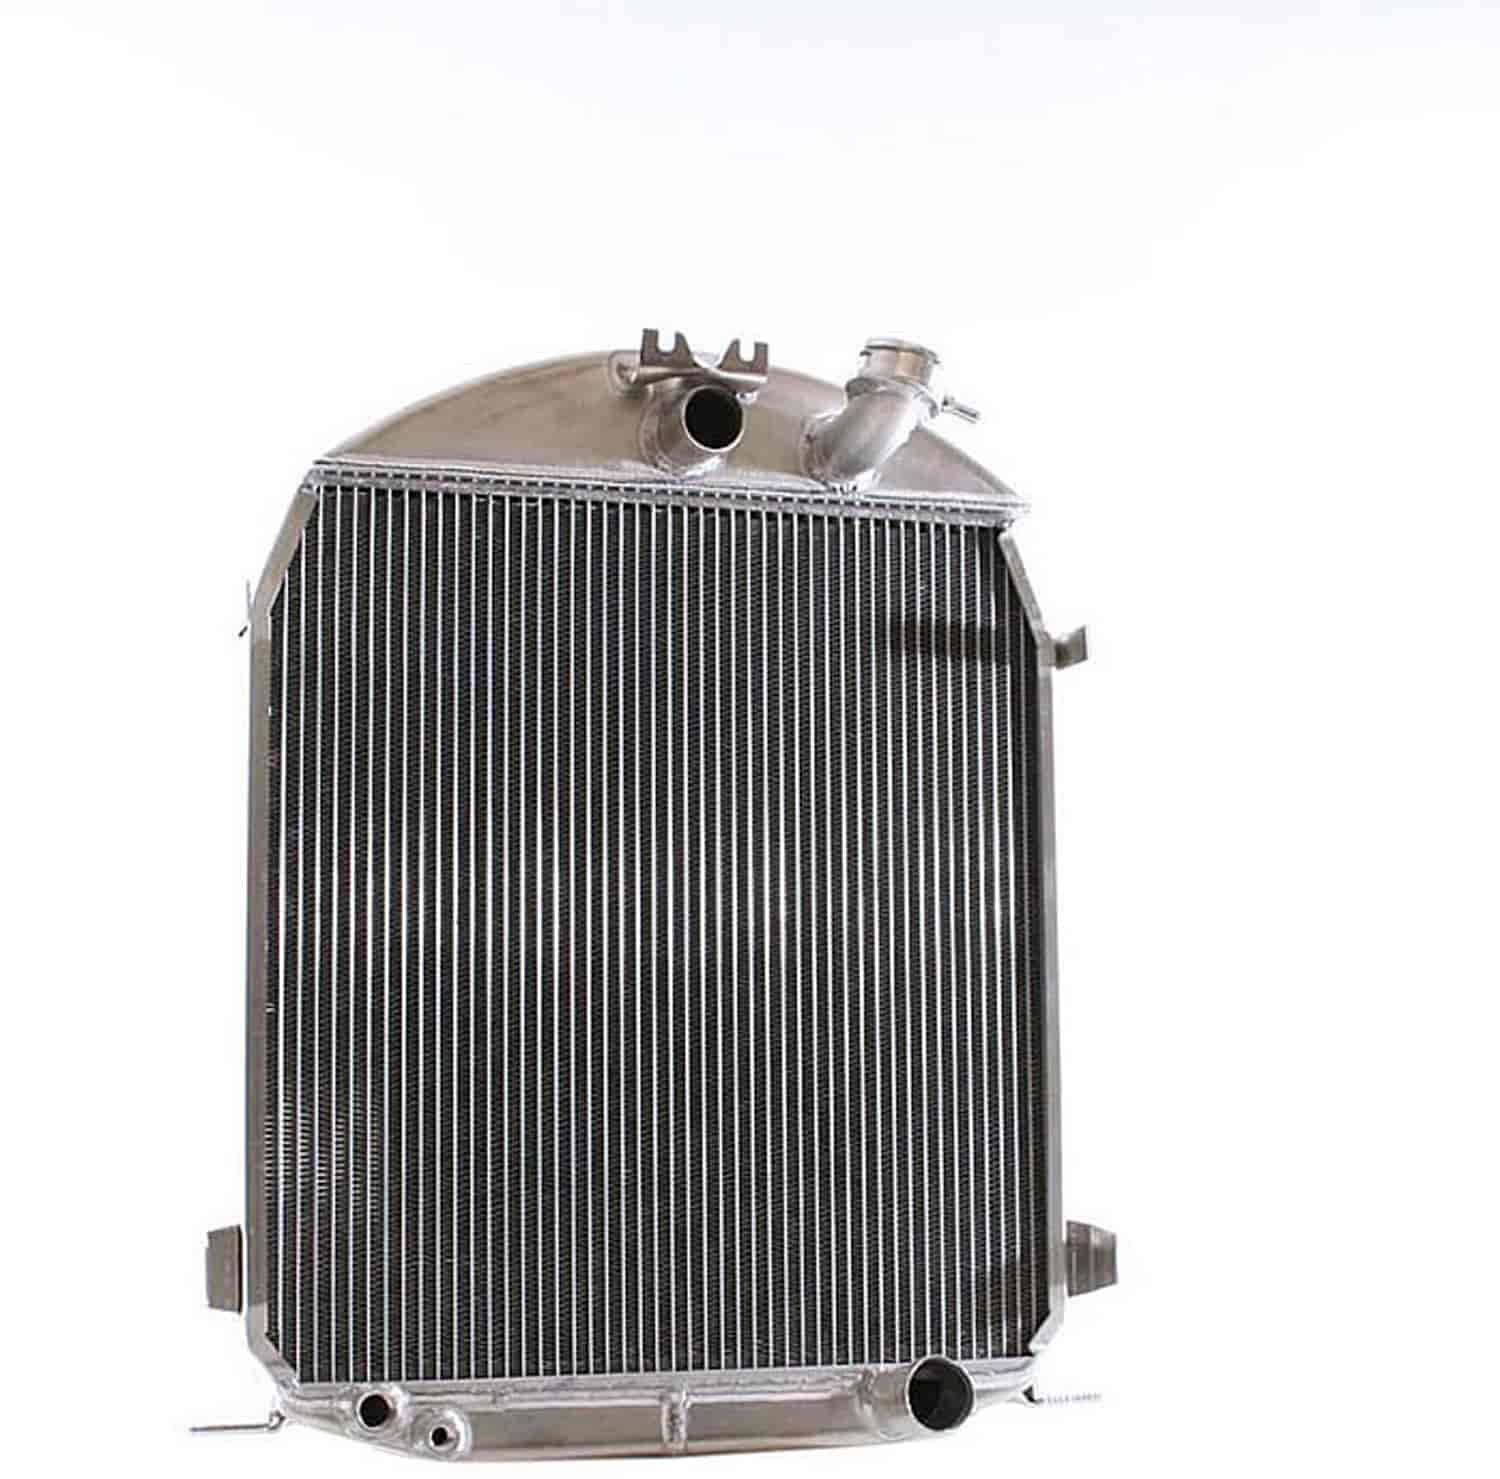 ExactFit Radiator for 1928-1929 Model A with Early GM Engine and Hood Rod Bracket